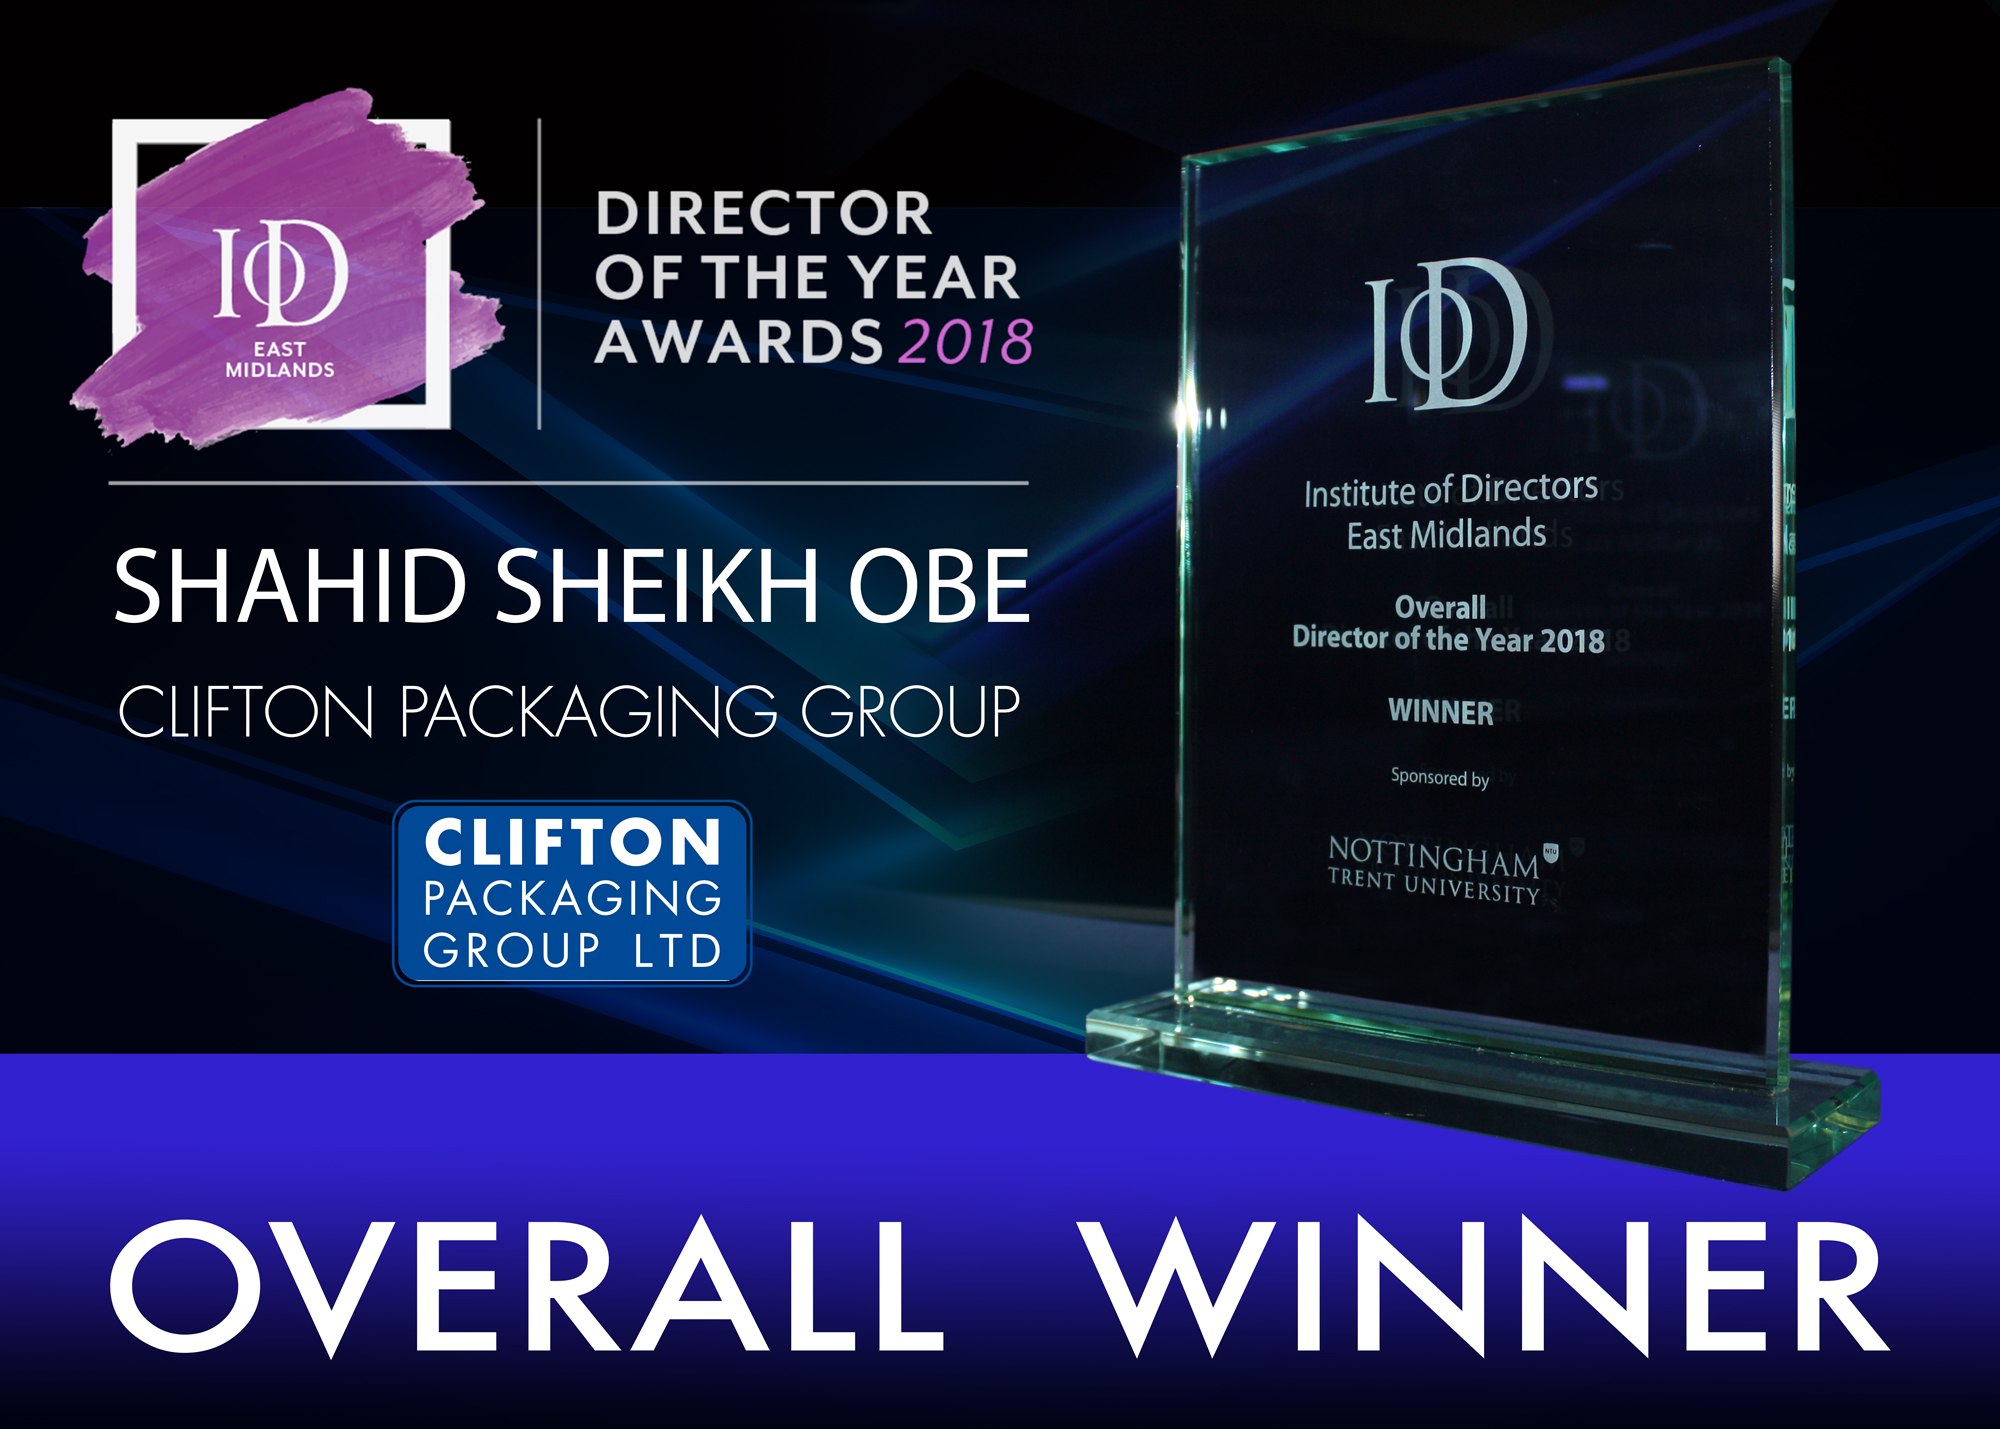 IoD - Director of the Year Awards 2018 - Overall Winner